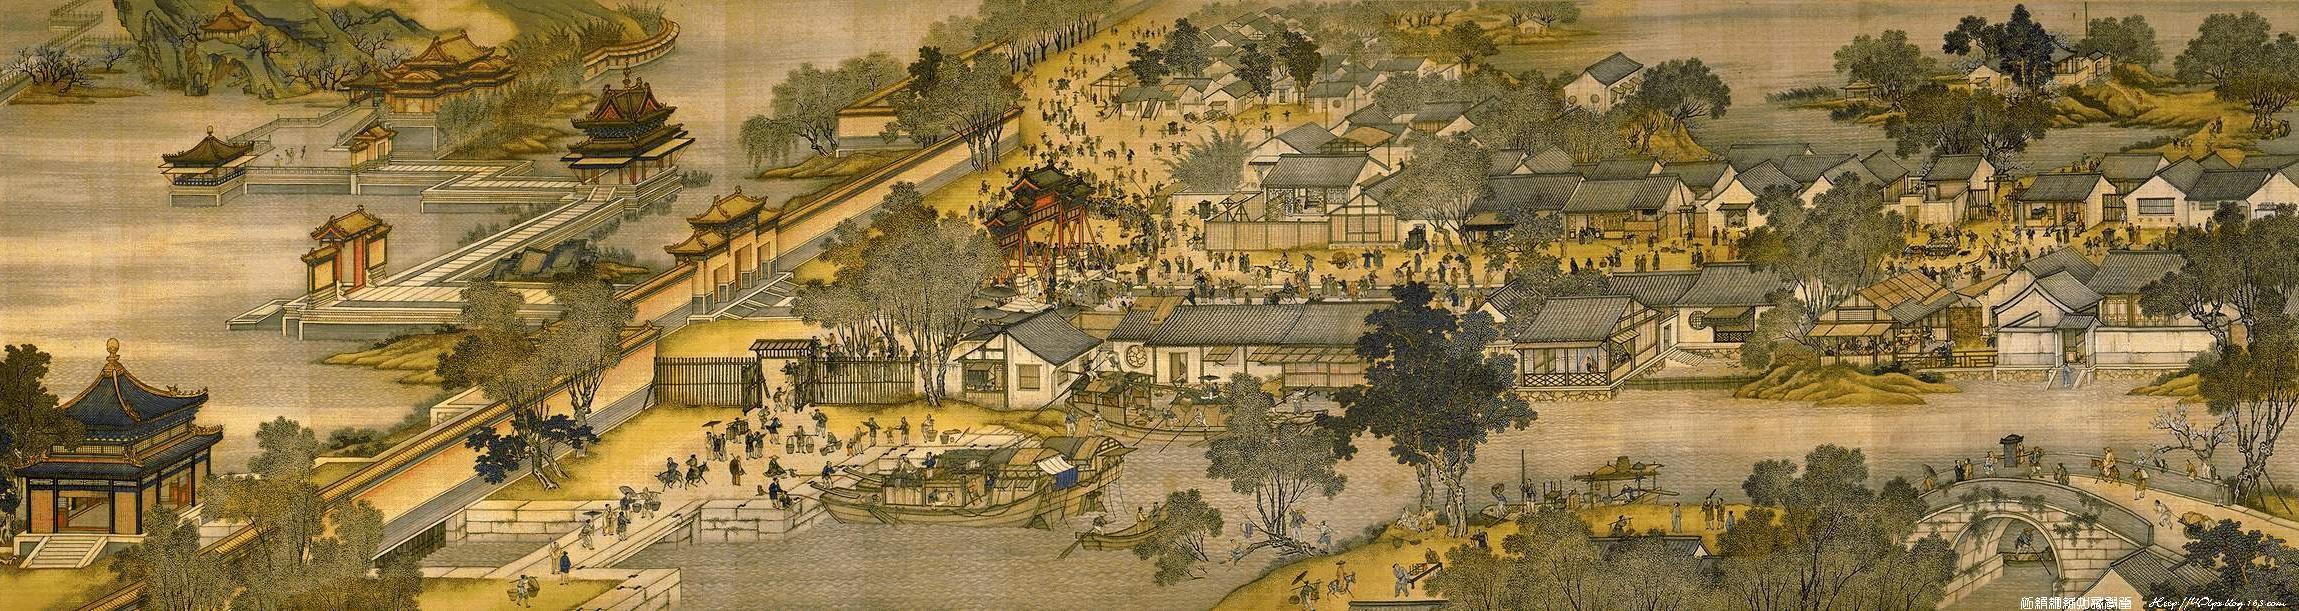 Along the River During the Qingming Festival. Drawings